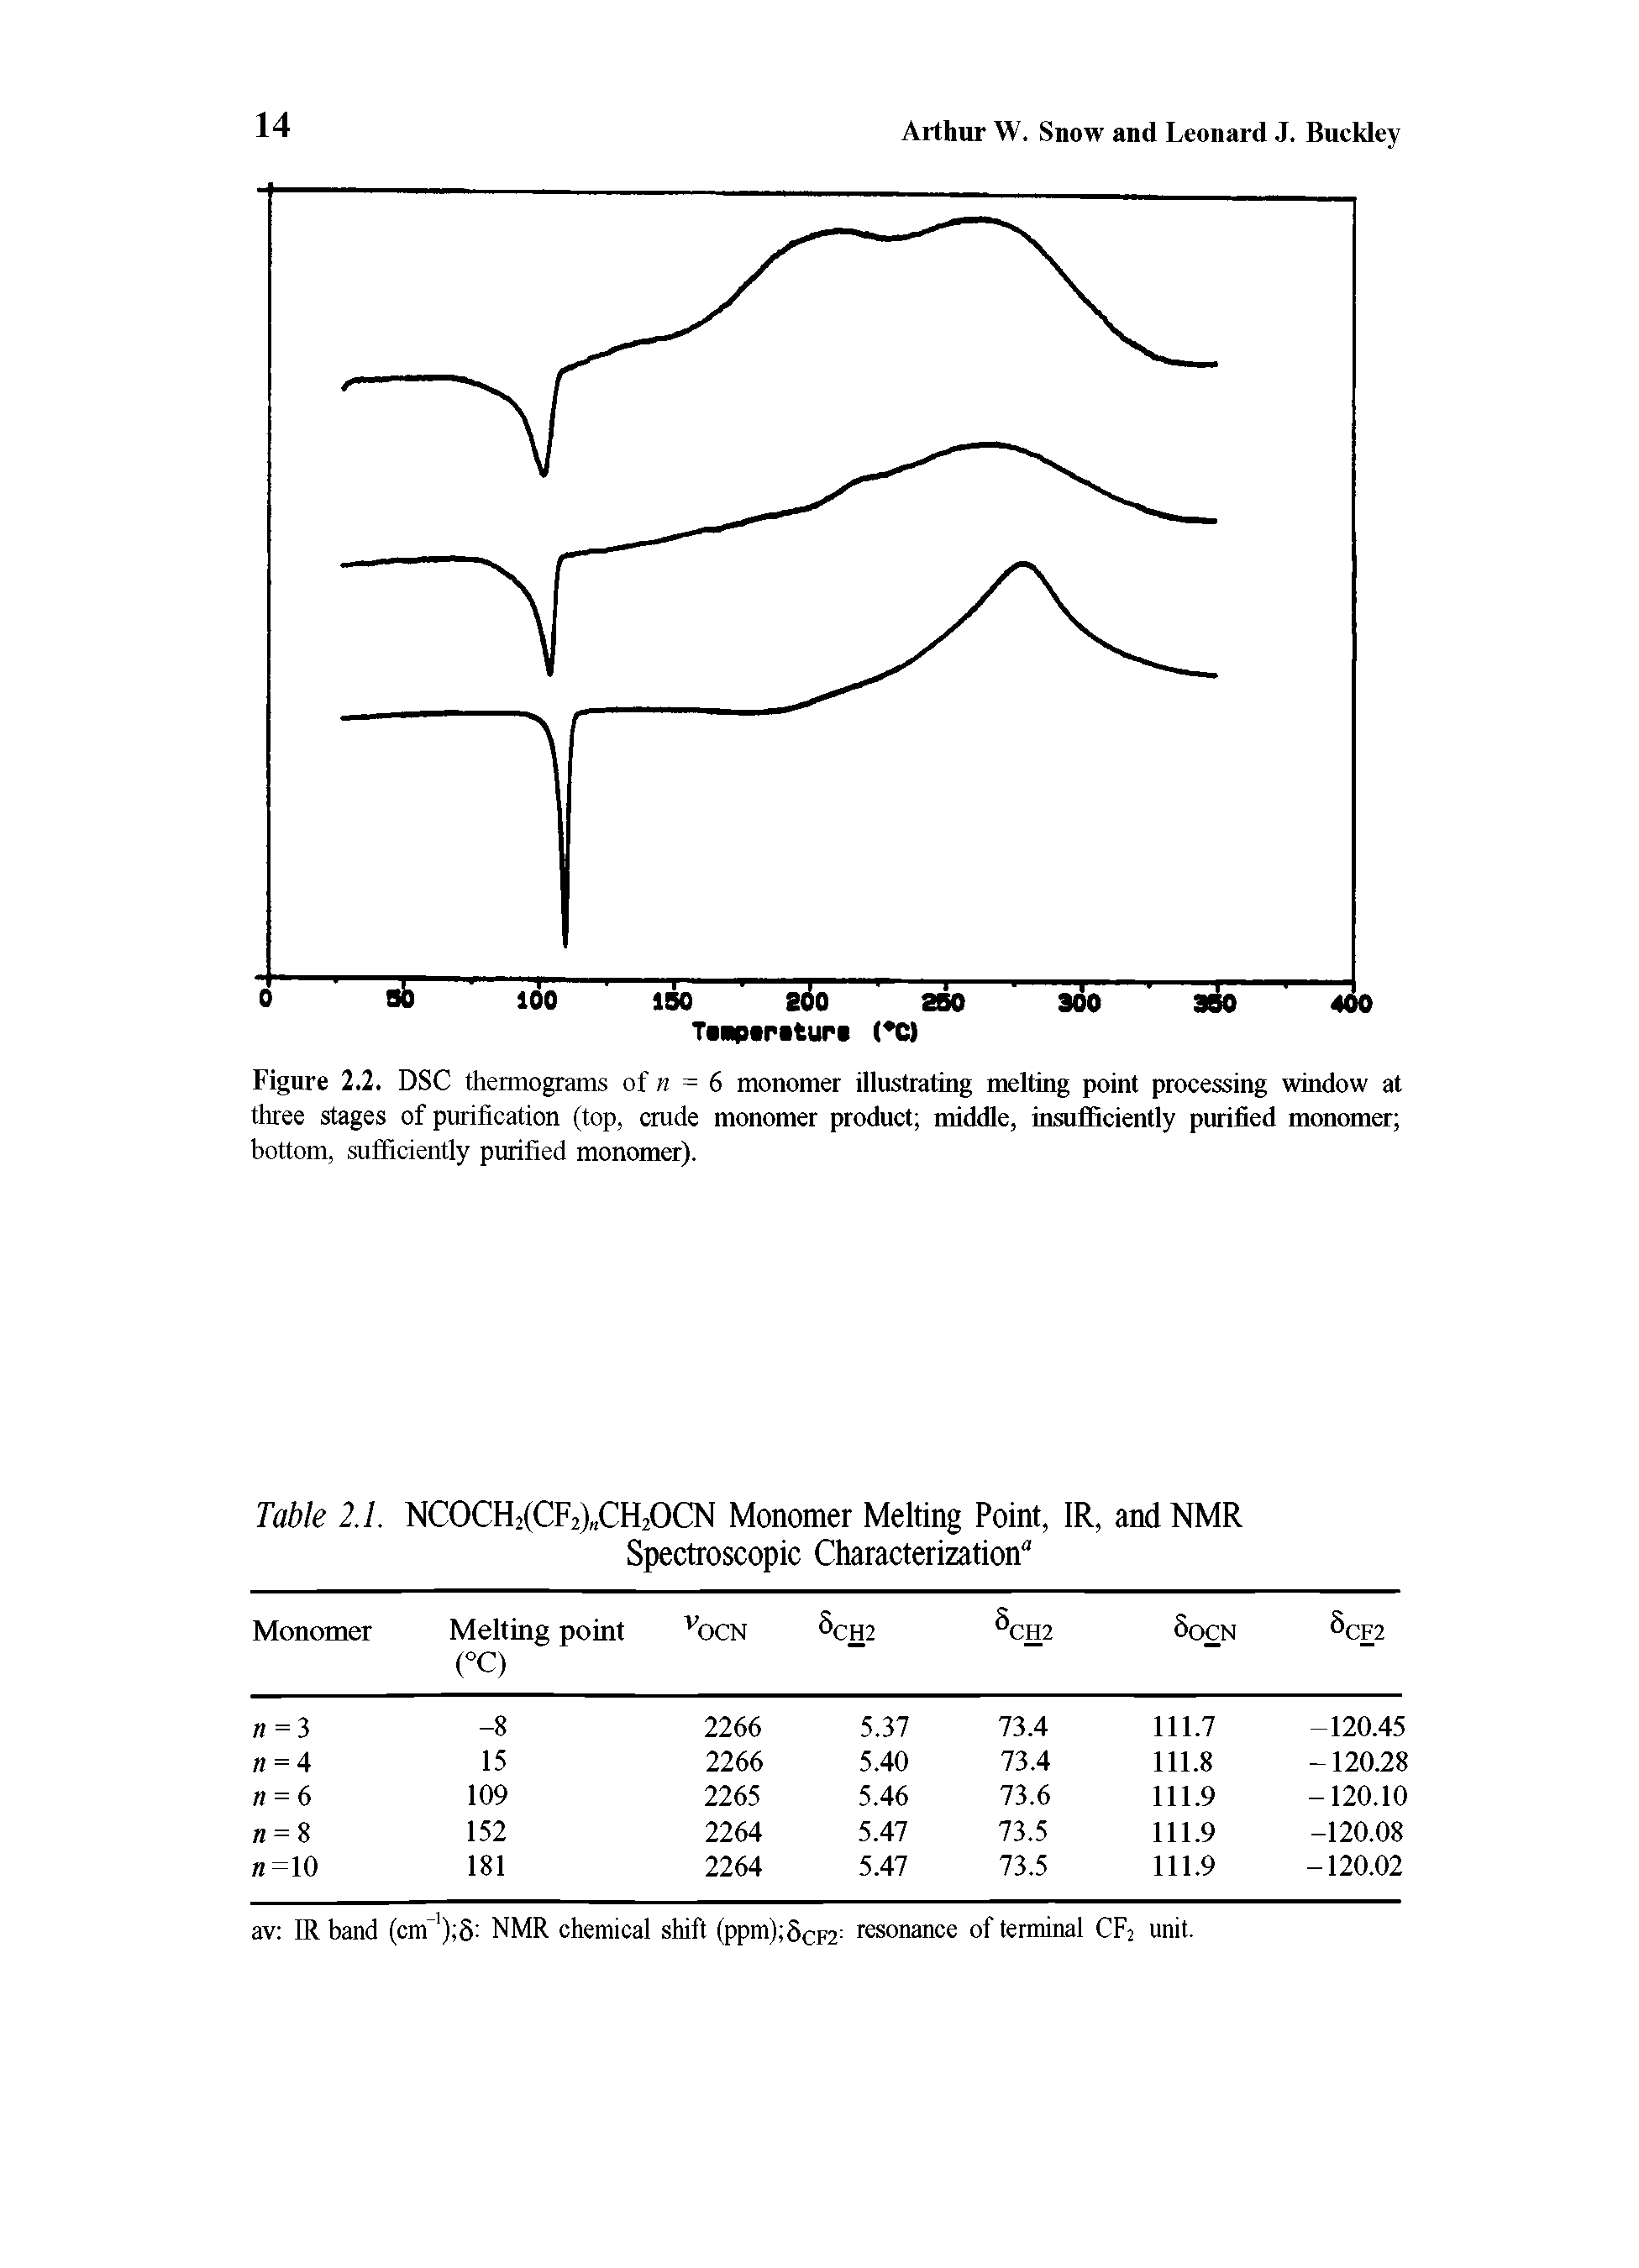 Figure 2.2. DSC thermograms of n = 6 monomer illustrating melting point processing window at three stages of purification (top, crude monomer product middle, insufficiently purified monomer bottom, sufficiently purified monomer).